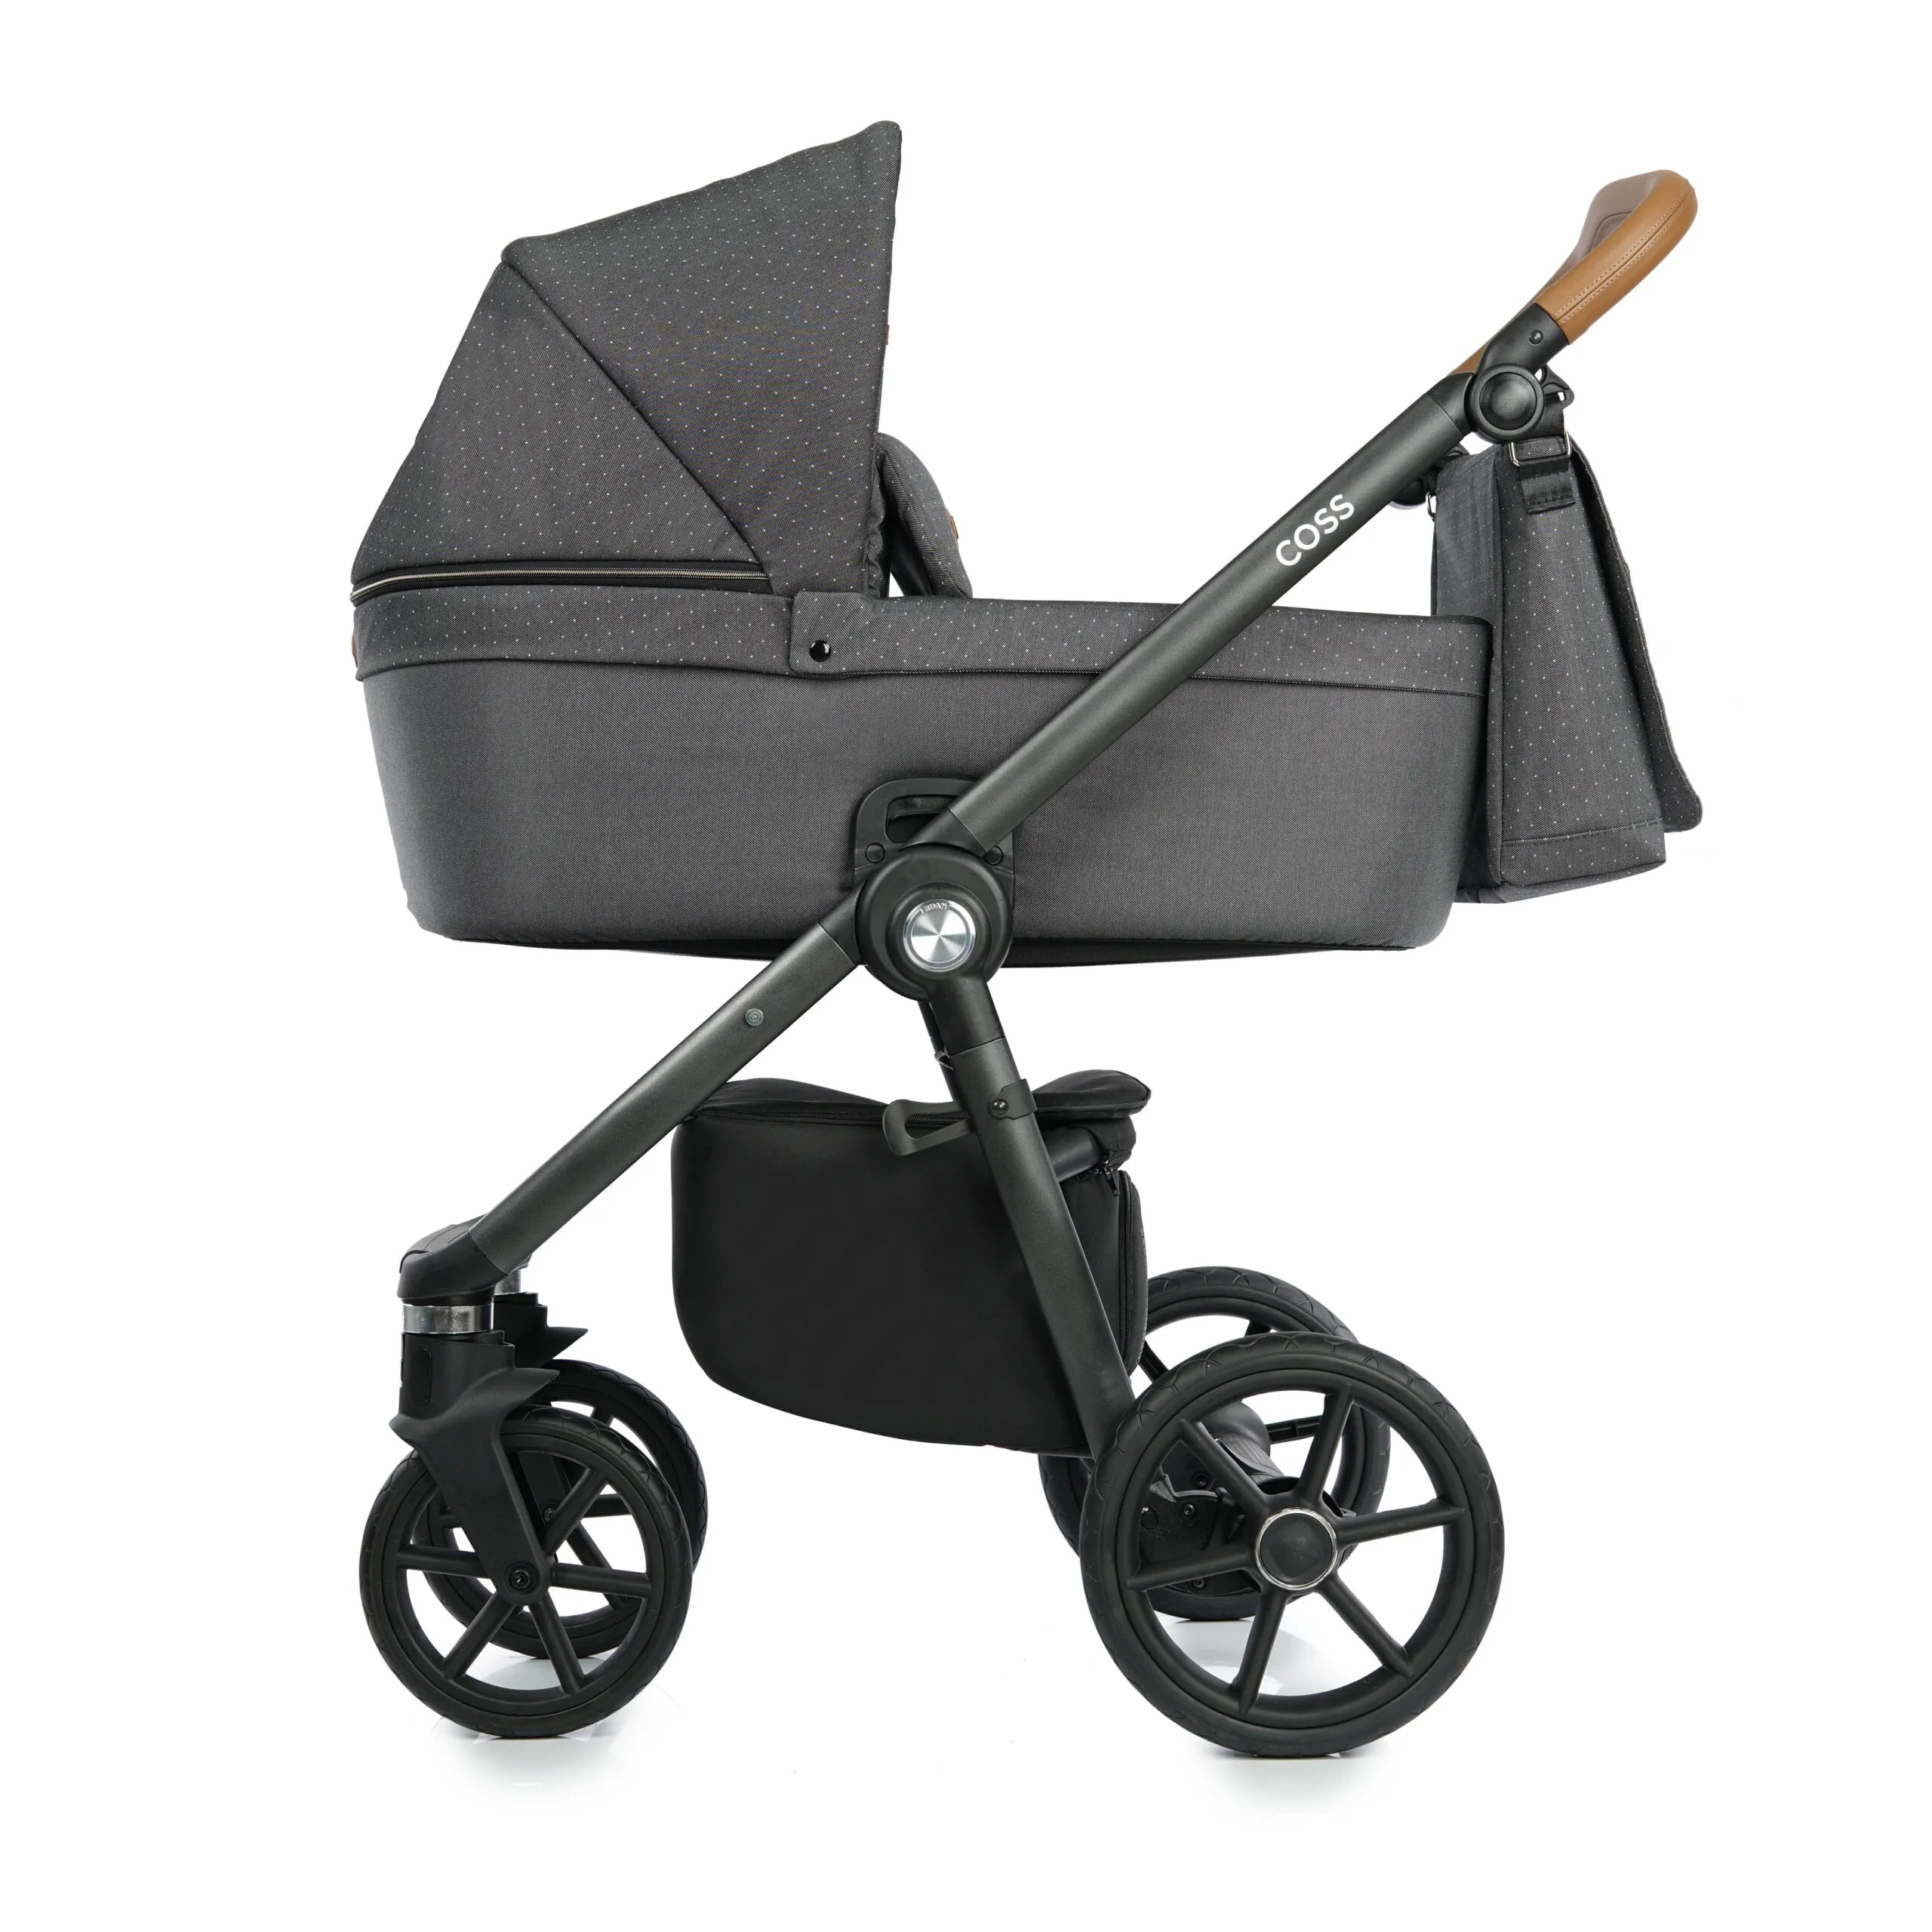 Roan COSS baby stroller carry cot and stroller, color Black Dots